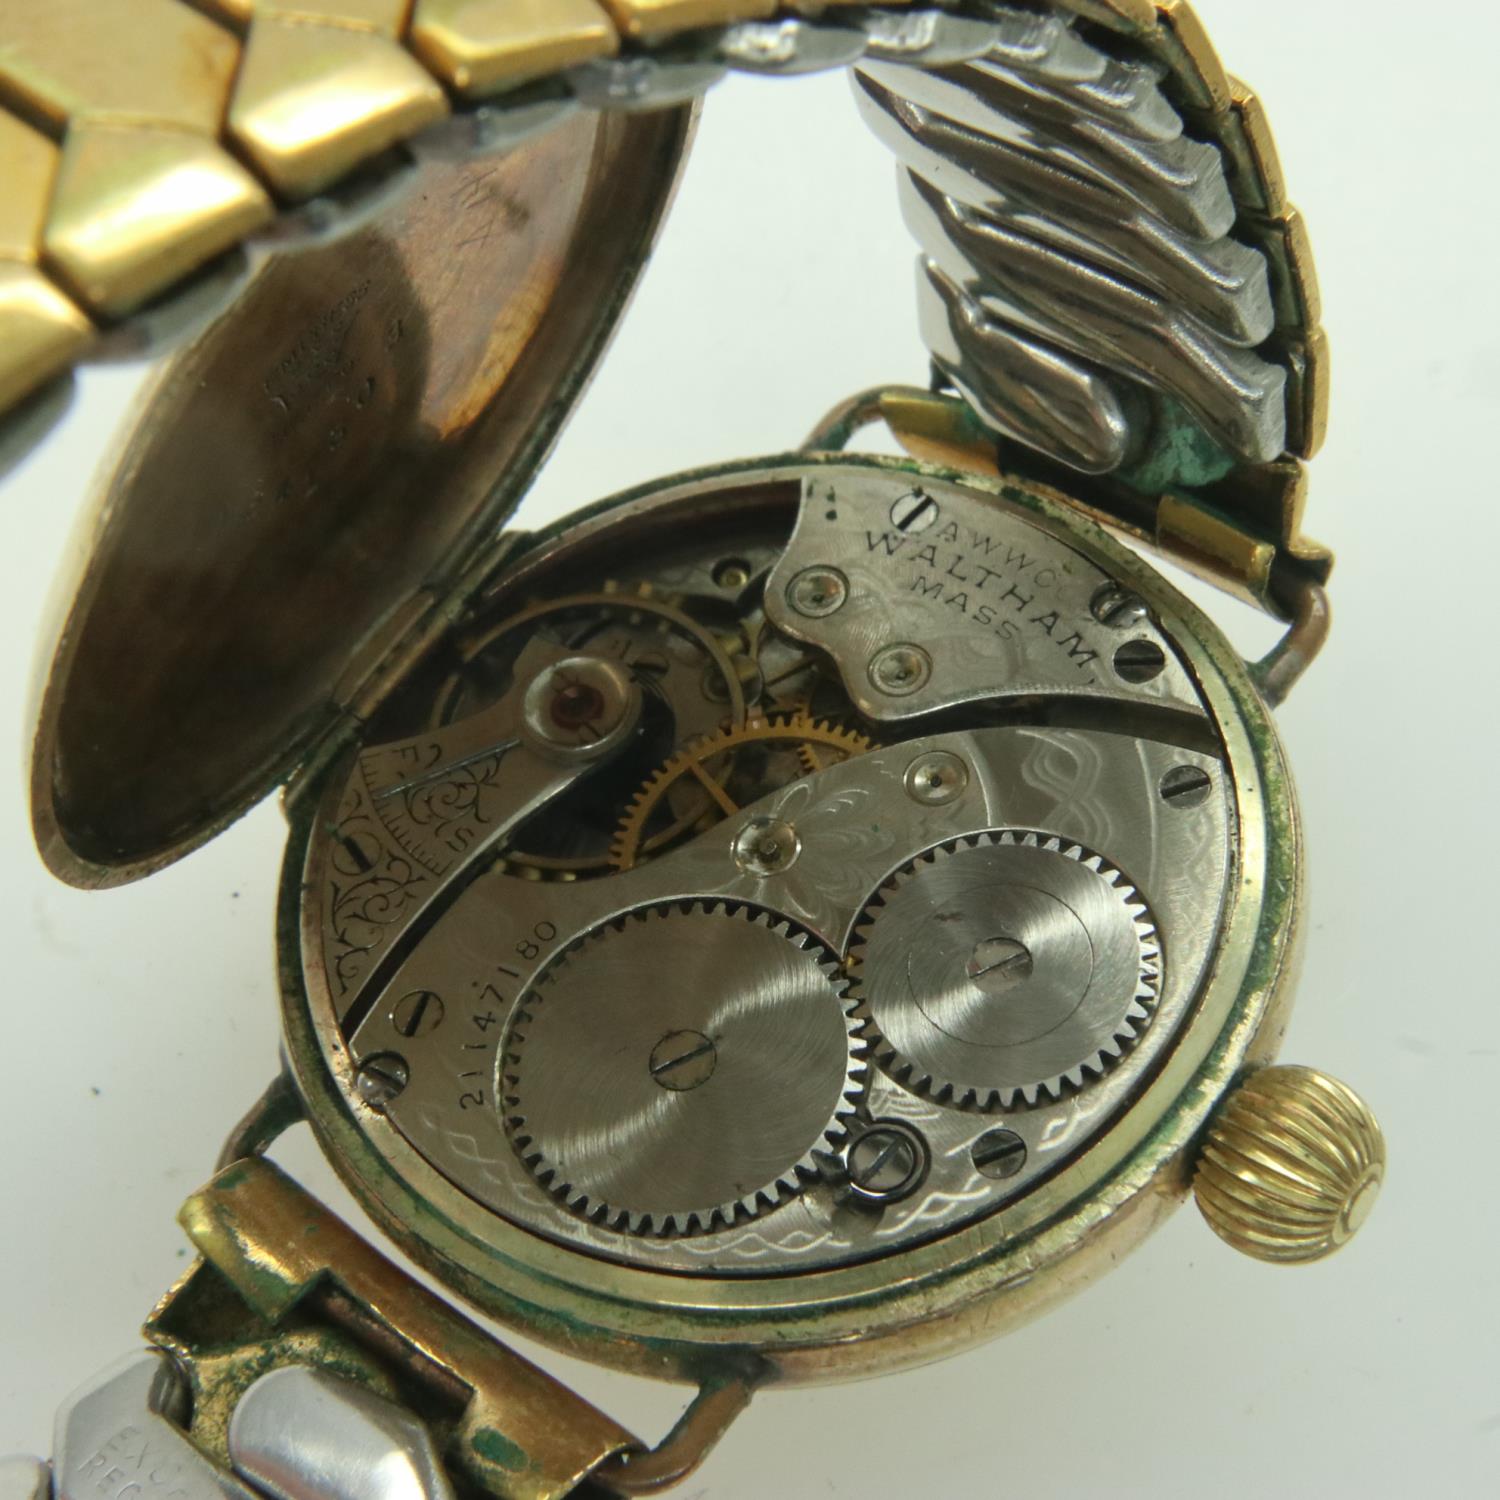 WALTHAM: gents manual wind gold plated wristwatch, with subsidiary seconds dial, on a gold plated - Image 3 of 3